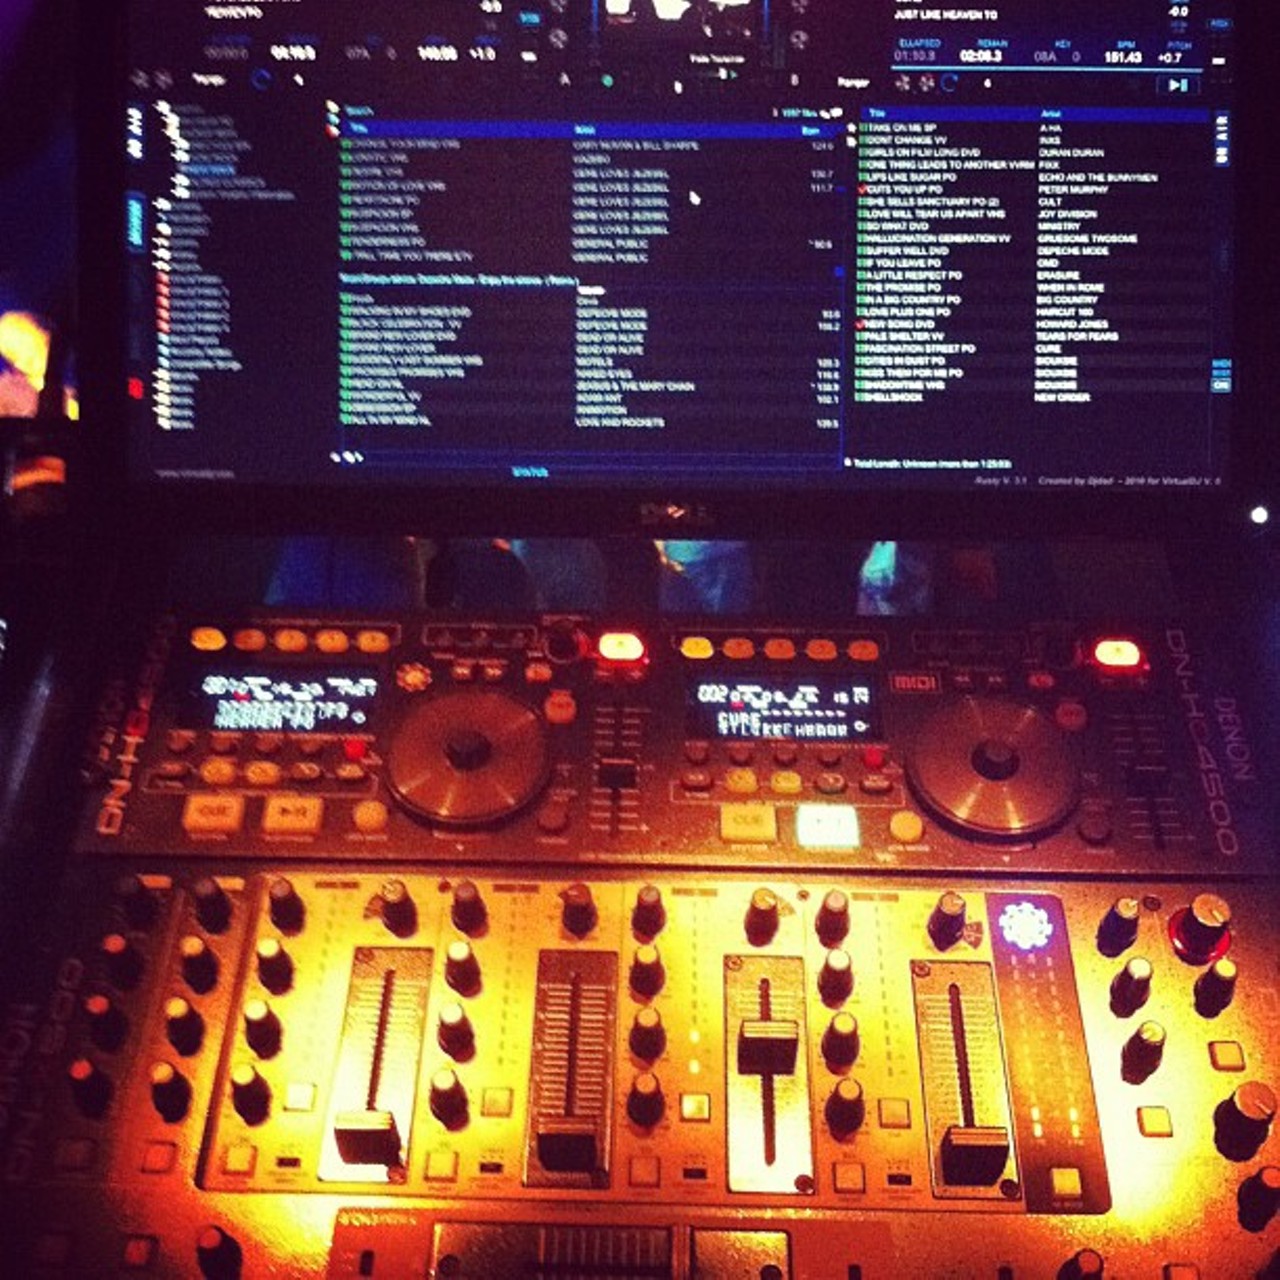 Independent Bar DJ Booth Photo by @kimballcollins (via Instagram)